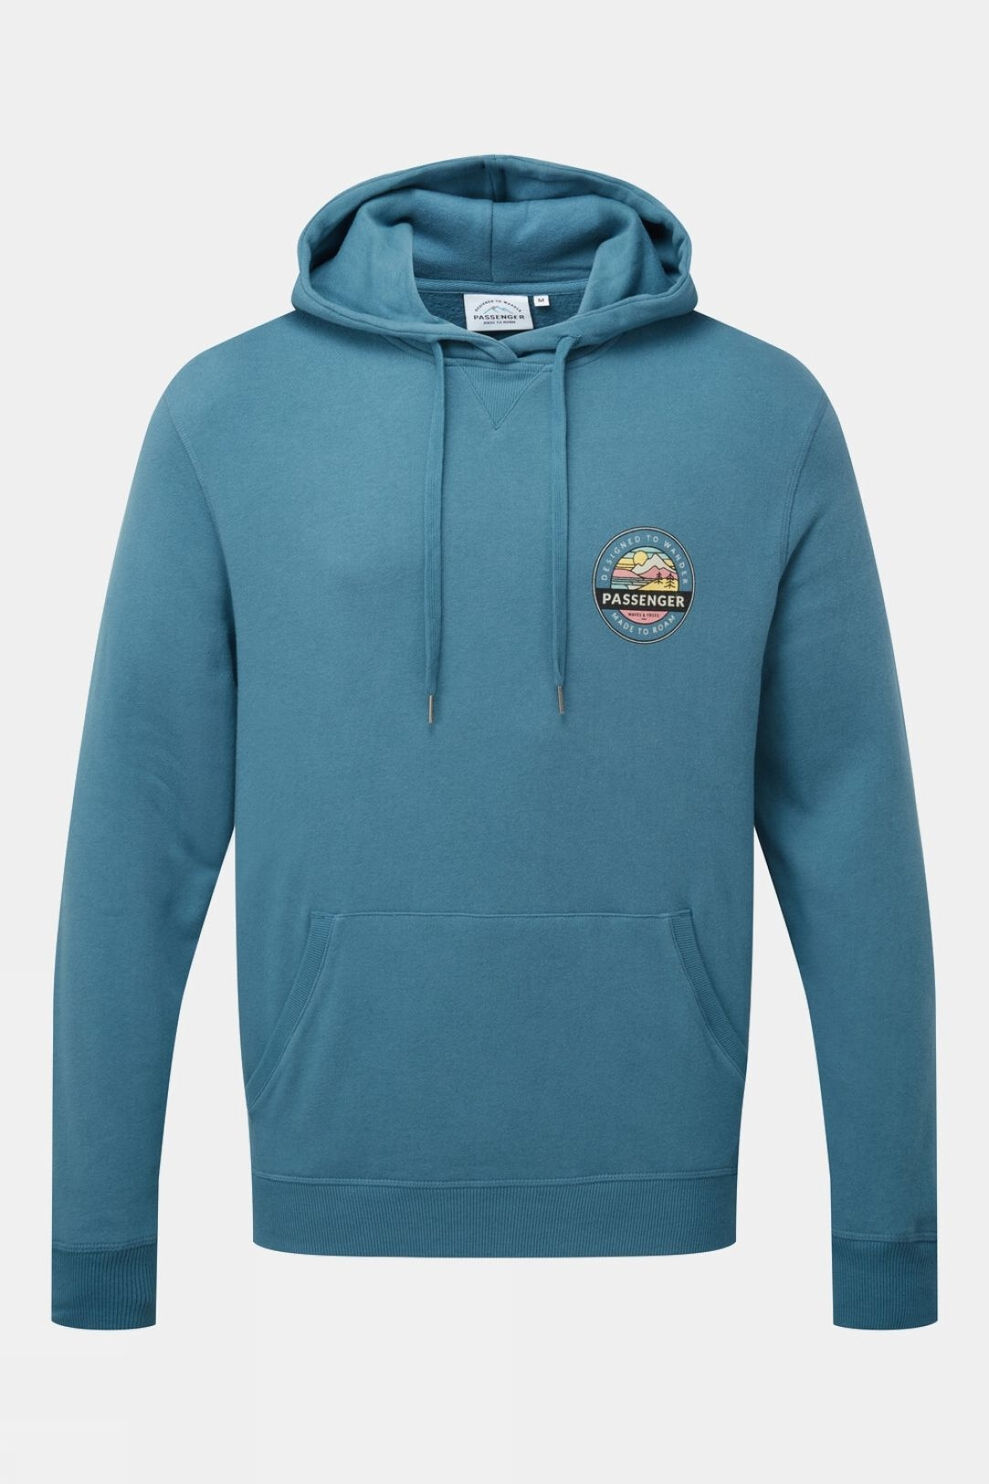 Passenger Mens Odyssey Recycled Cotton Hoodie